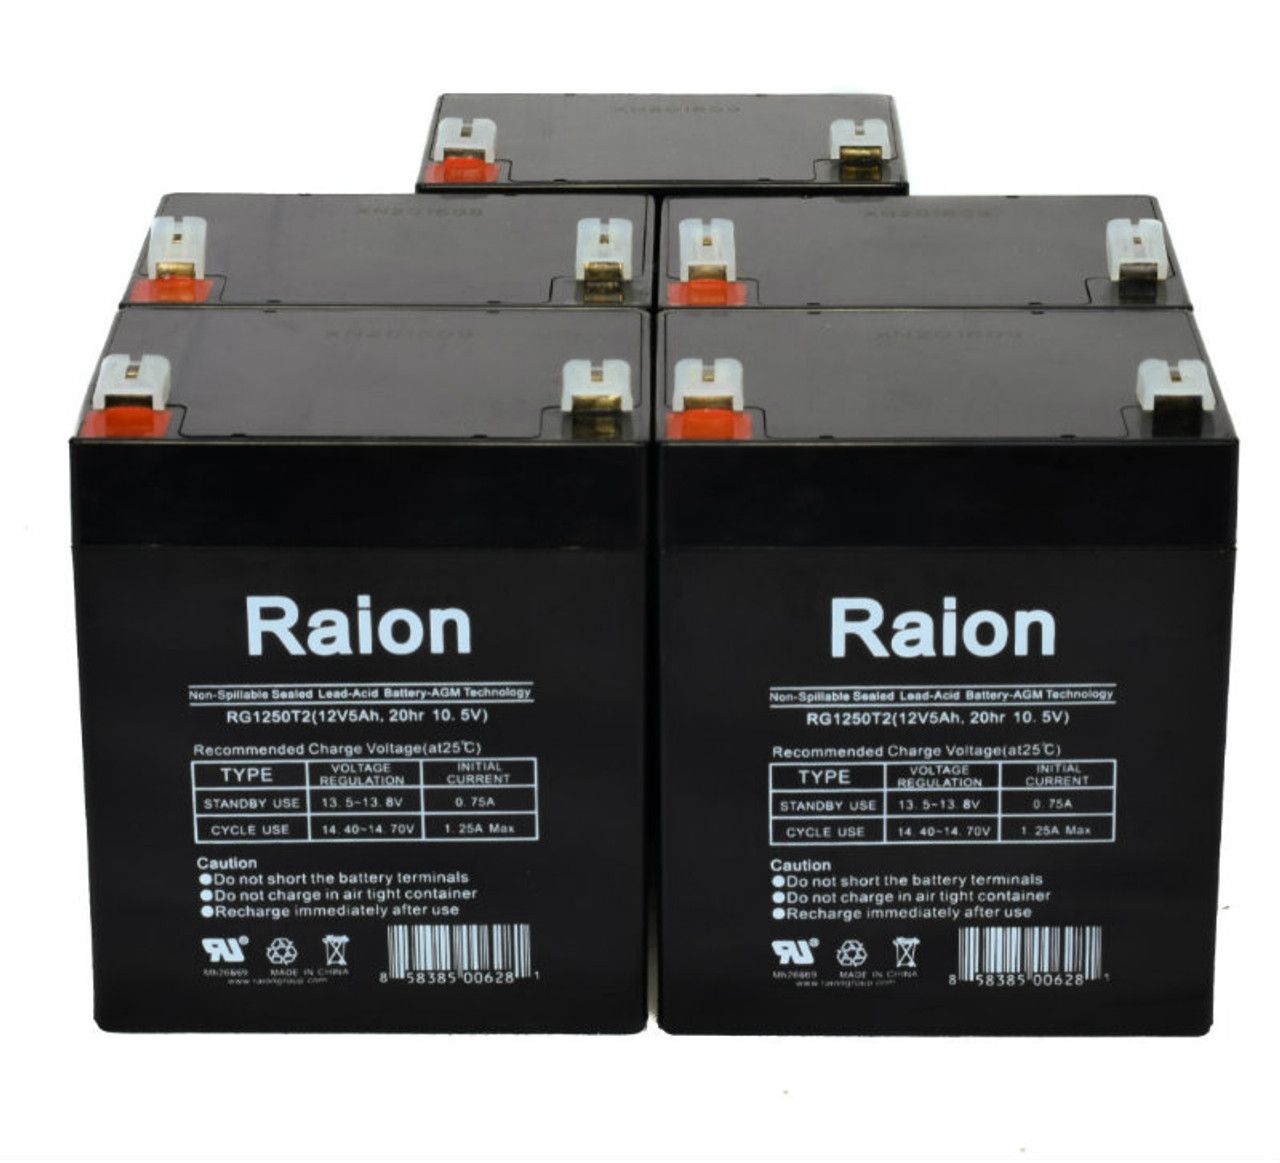 Raion Power RG1250T1 Replacement Fire Alarm Control Panel Battery for Securitron BPS2410 - 8 Pack